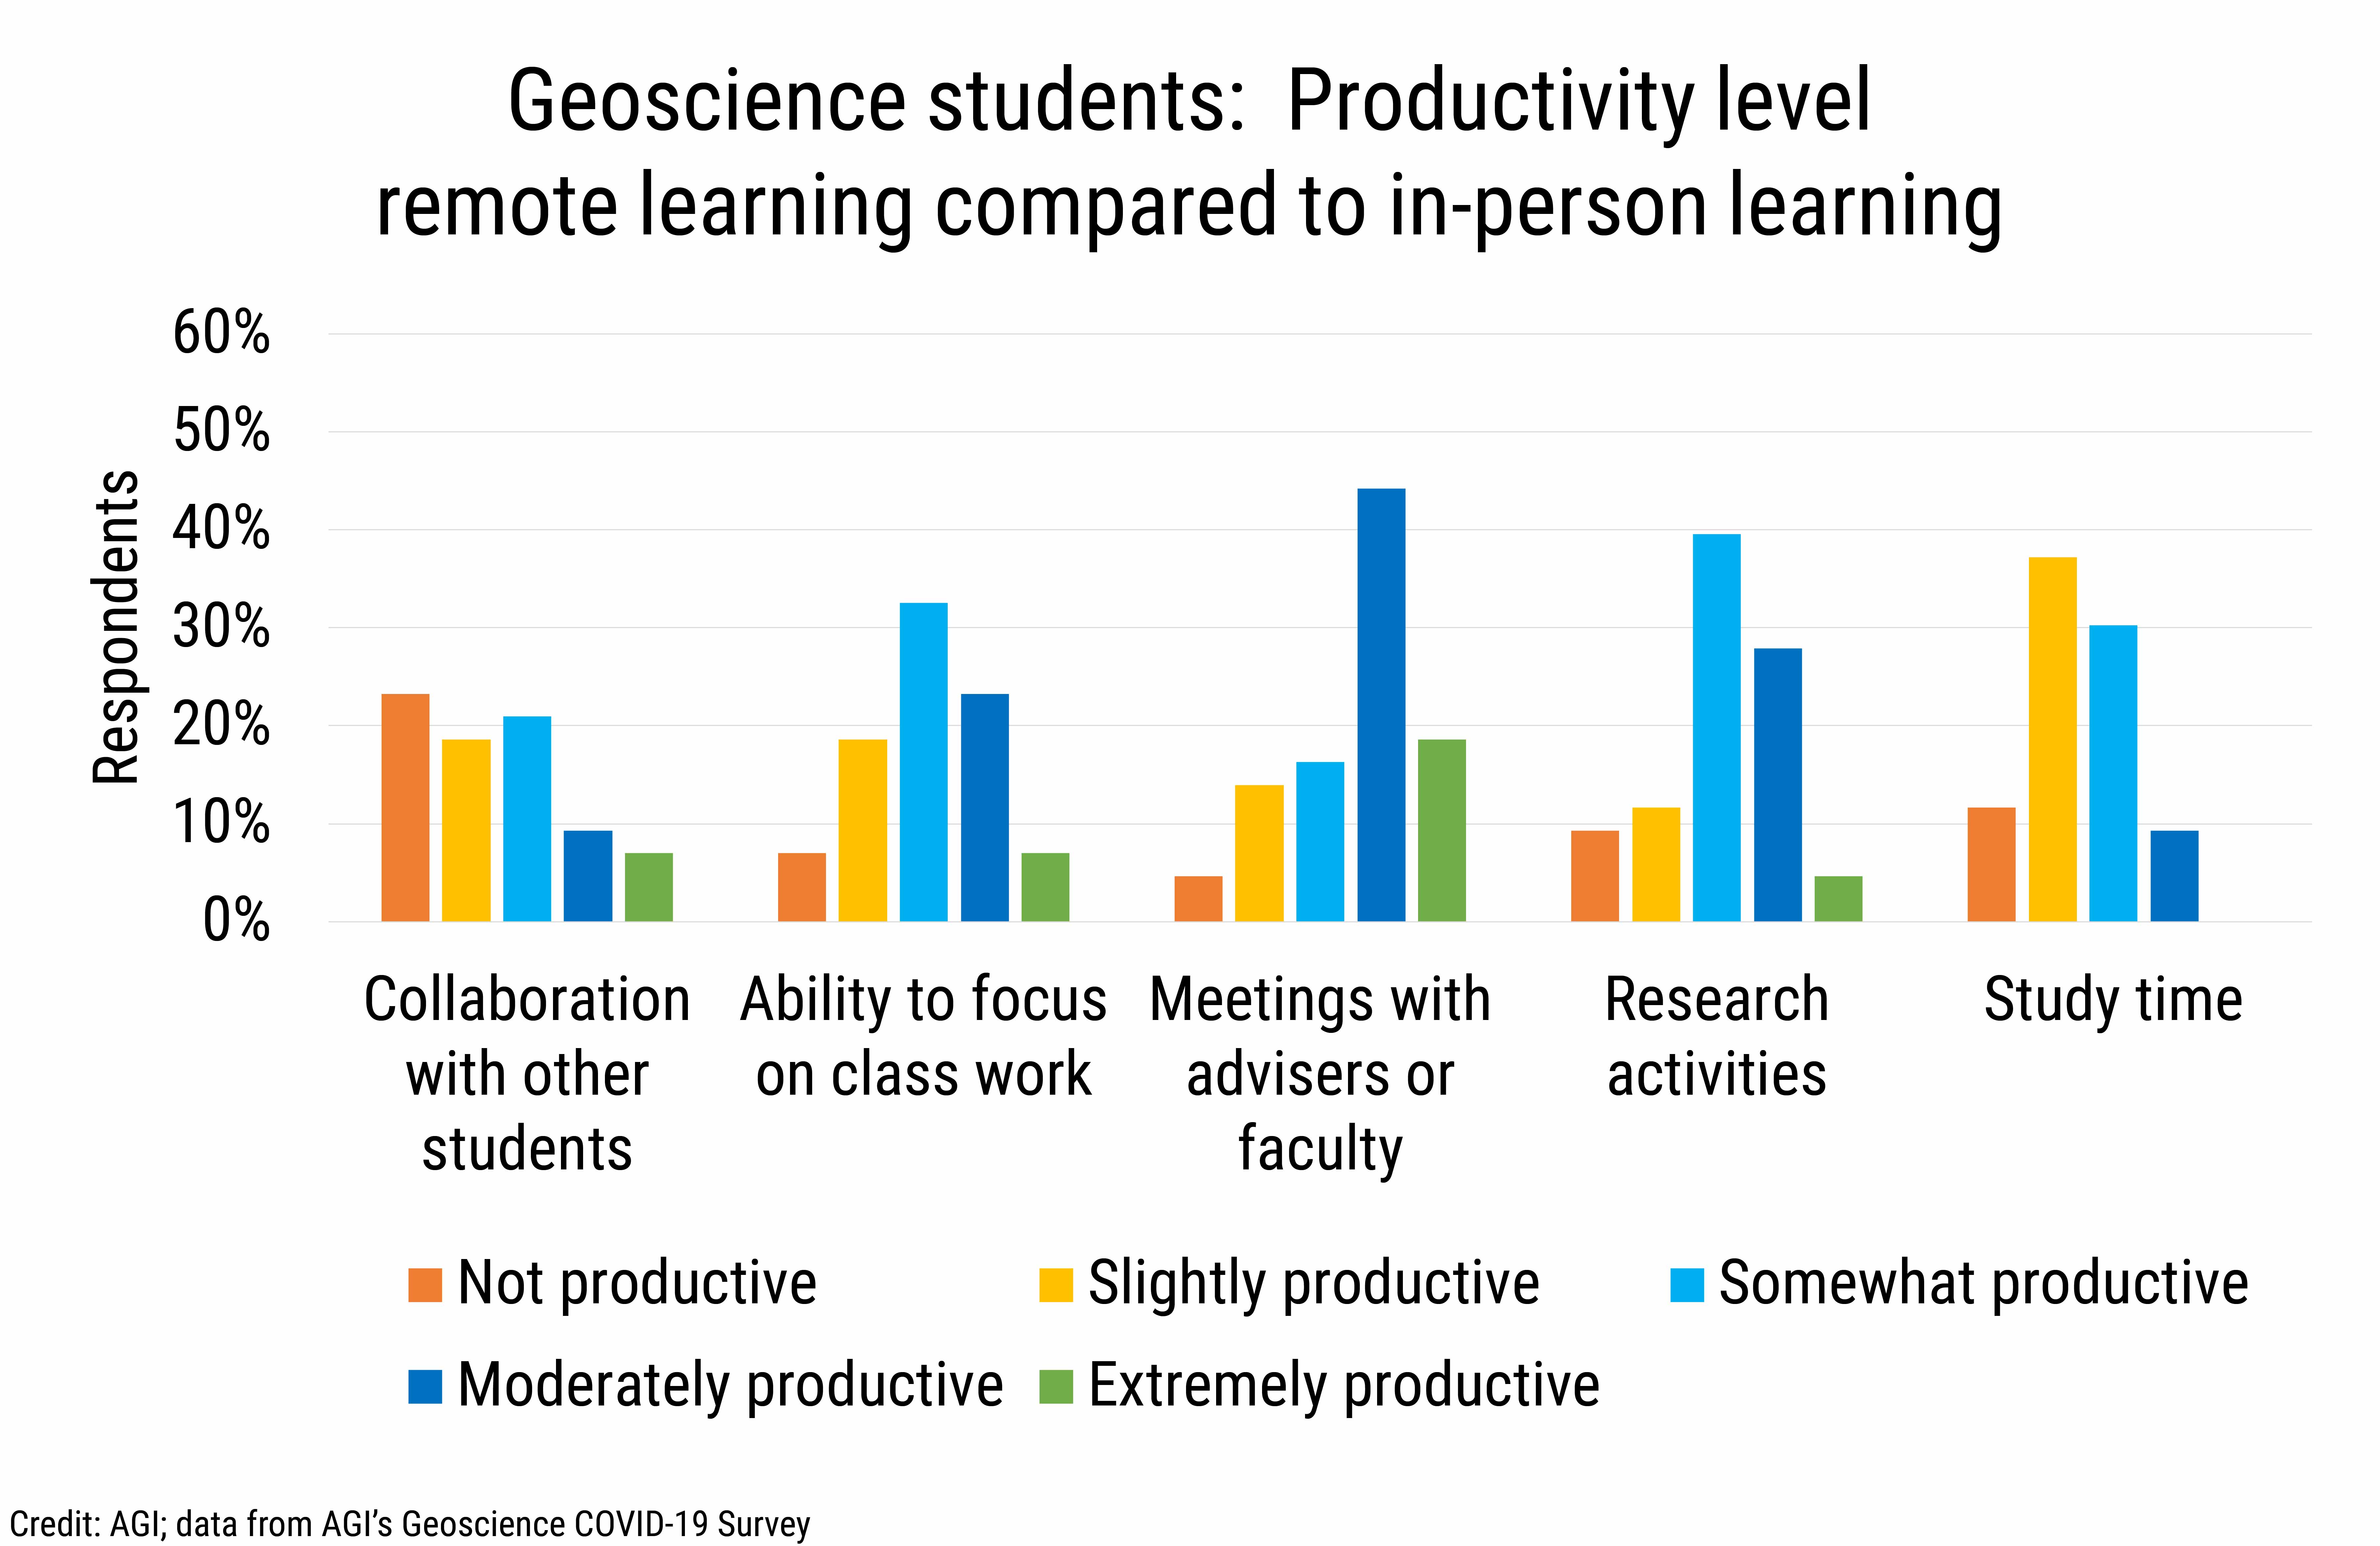 DB_2021-018 chart 04: Geoscience students: Productivity level remote learning compared to in-person learning (Credit: AGI; data from AGI&#039;s Geoscience COVID-19 Survey)